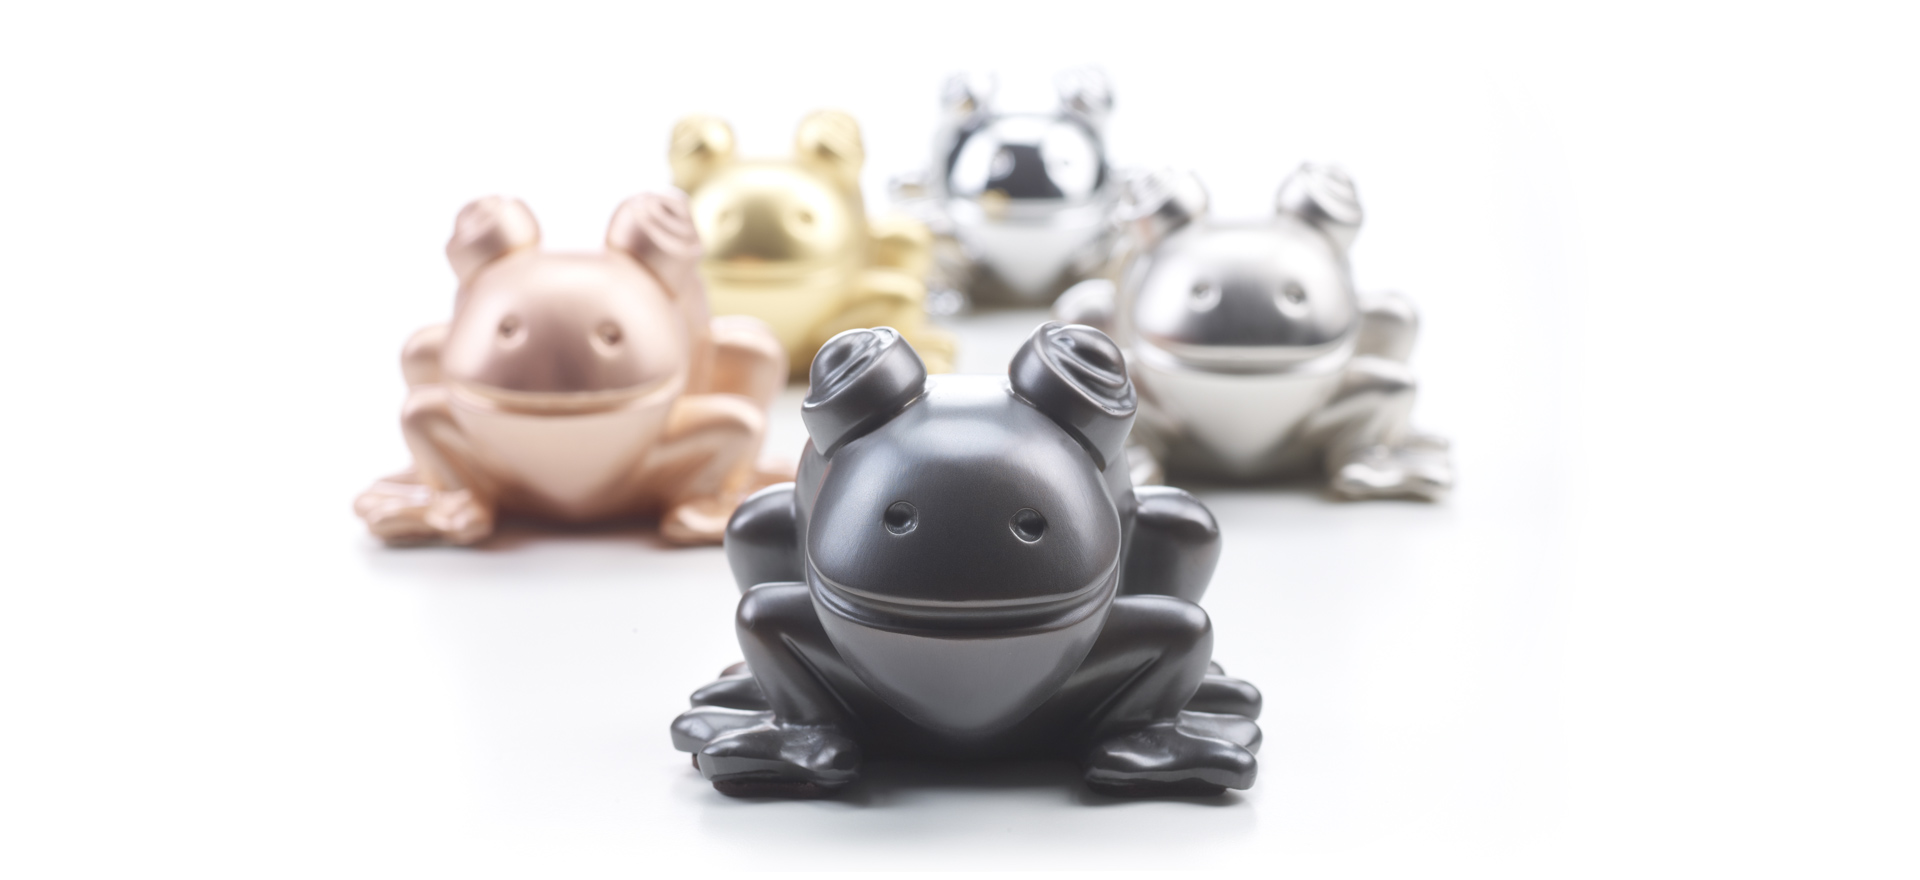 /mediaRana%20in%20Metallo%20is%20a%20metal%20frog,%20Promemoria's%20mascot,%20available%20in%20several%20different%20types%20of%20metal,%20from%20Promemoria's%20catalogue%20|%20Promemoria